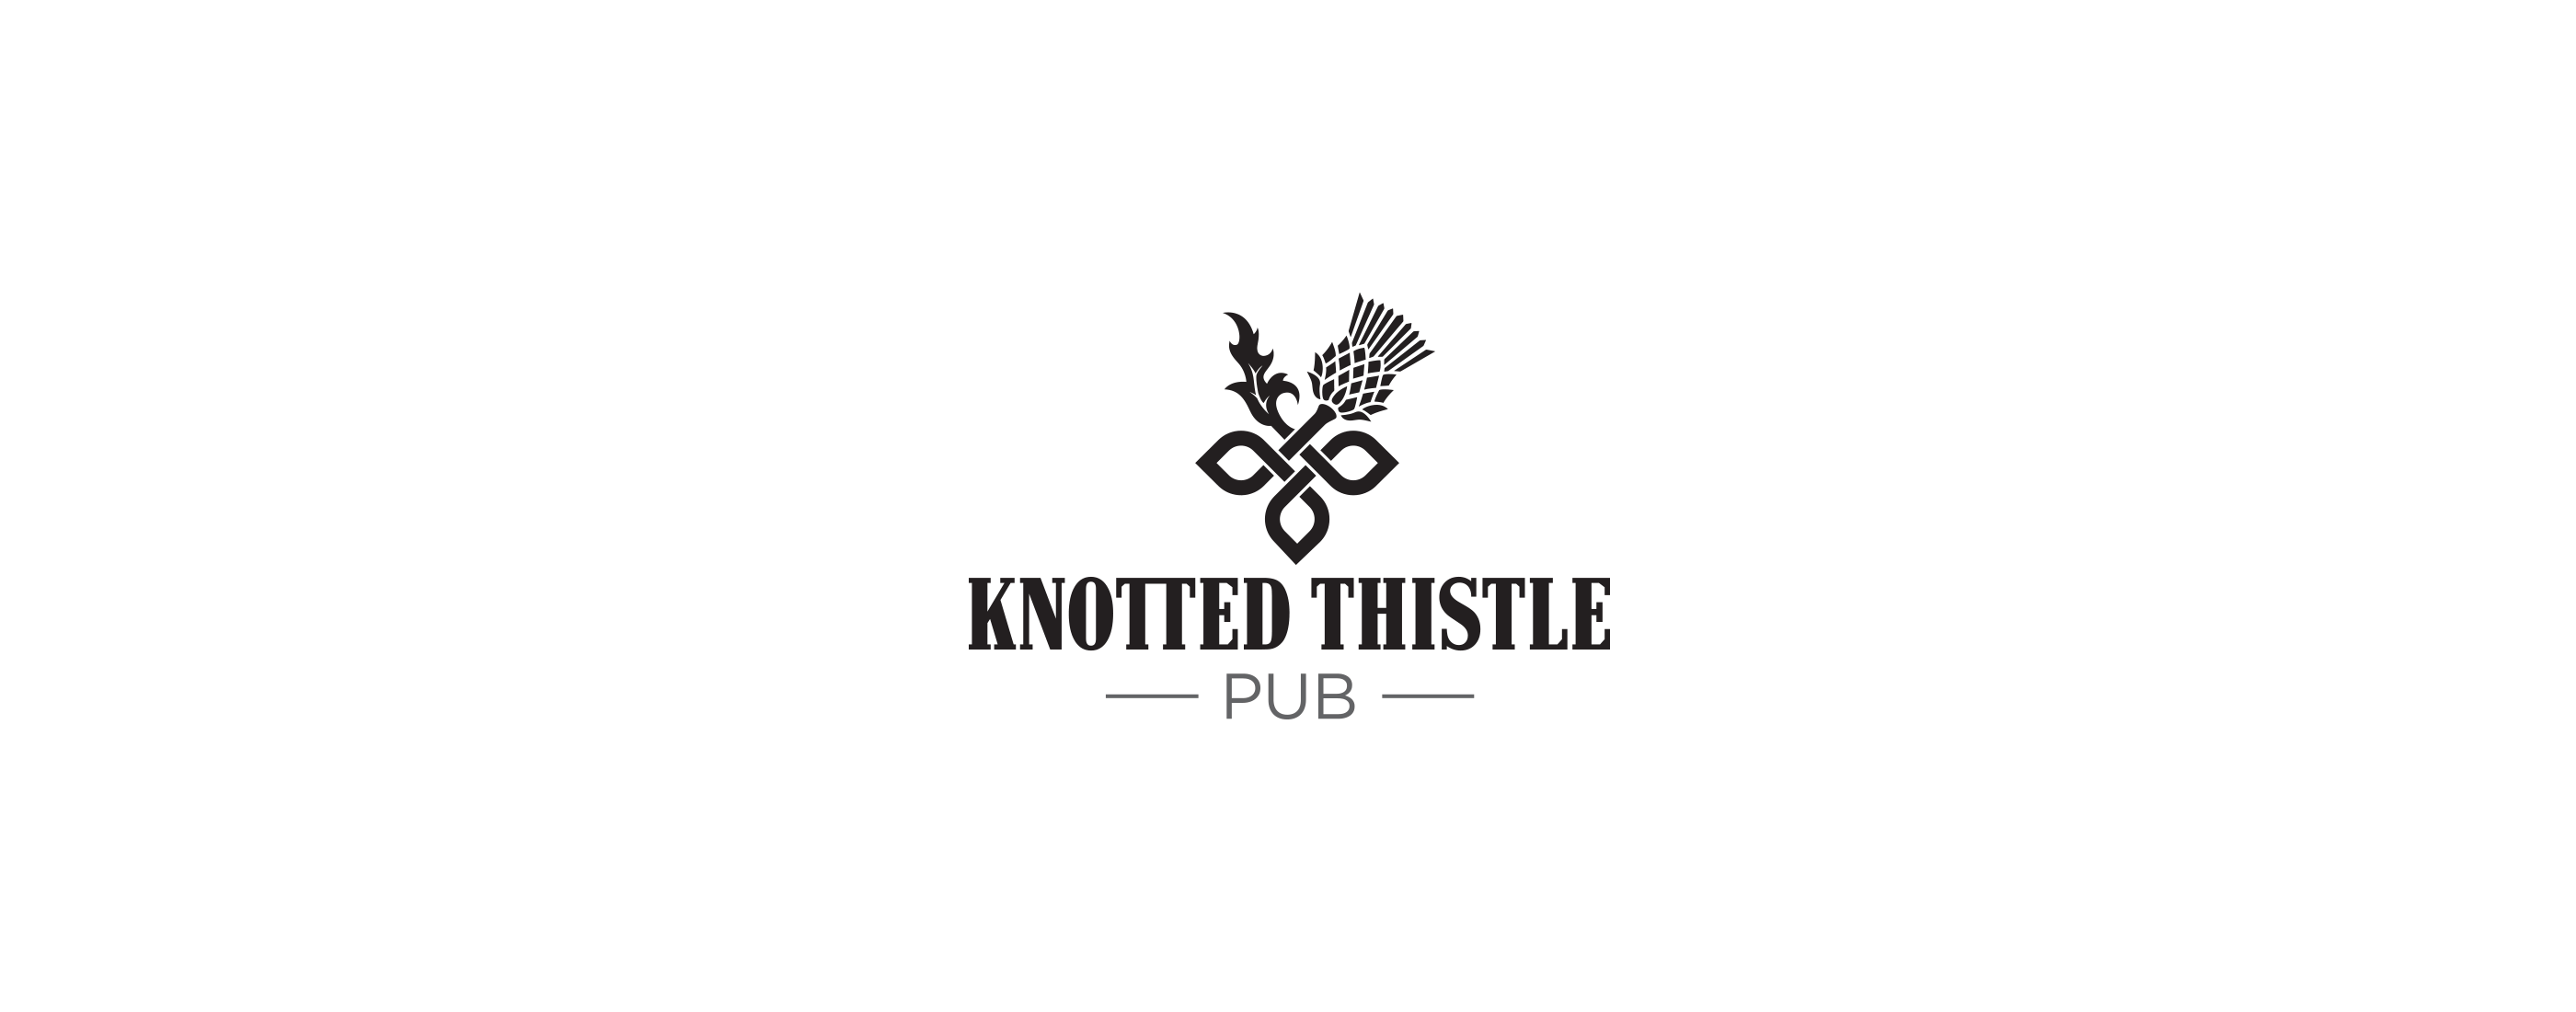 Knotted Thistle Pub - Logo